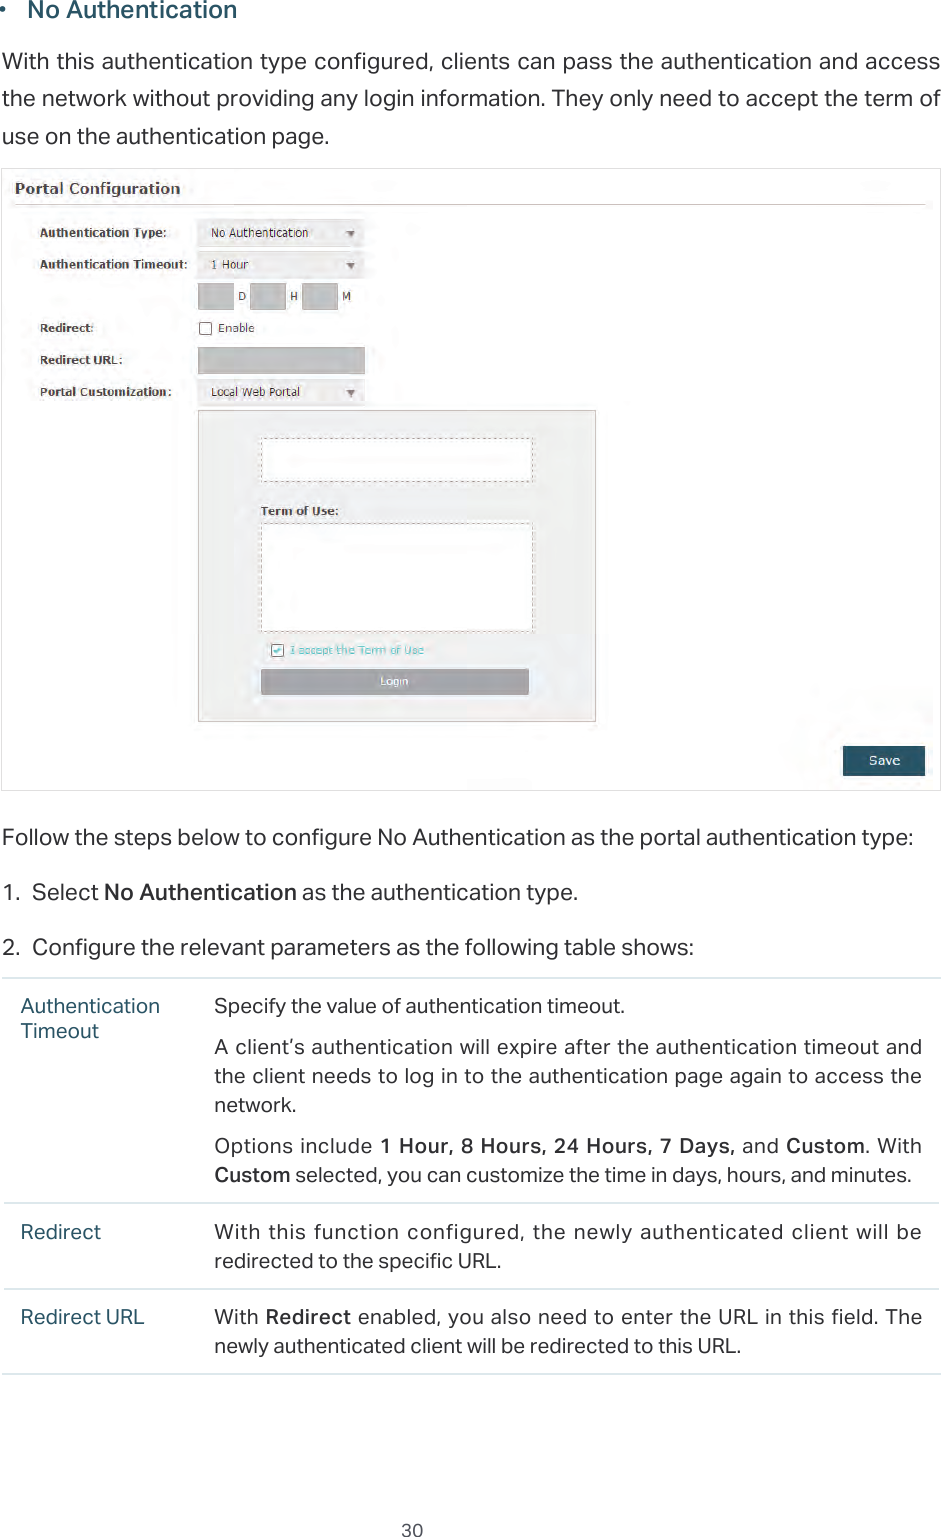  30 ·No AuthenticationWith this authentication type configured, clients can pass the authentication and access the network without providing any login information. They only need to accept the term of use on the authentication page.Follow the steps below to configure No Authentication as the portal authentication type:1. Select No Authentication as the authentication type.2. Configure the relevant parameters as the following table shows:Authentication TimeoutSpecify the value of authentication timeout.A client’s authentication will expire after the authentication timeout and the client needs to log in to the authentication page again to access the network.Options include 1 Hour, 8 Hours, 24 Hours, 7 Days, and Custom. With Custom selected, you can customize the time in days, hours, and minutes.Redirect With this function configured, the newly authenticated client will be redirected to the specific URL.Redirect URL With Redirect enabled, you also need to enter the URL in this field. The newly authenticated client will be redirected to this URL.